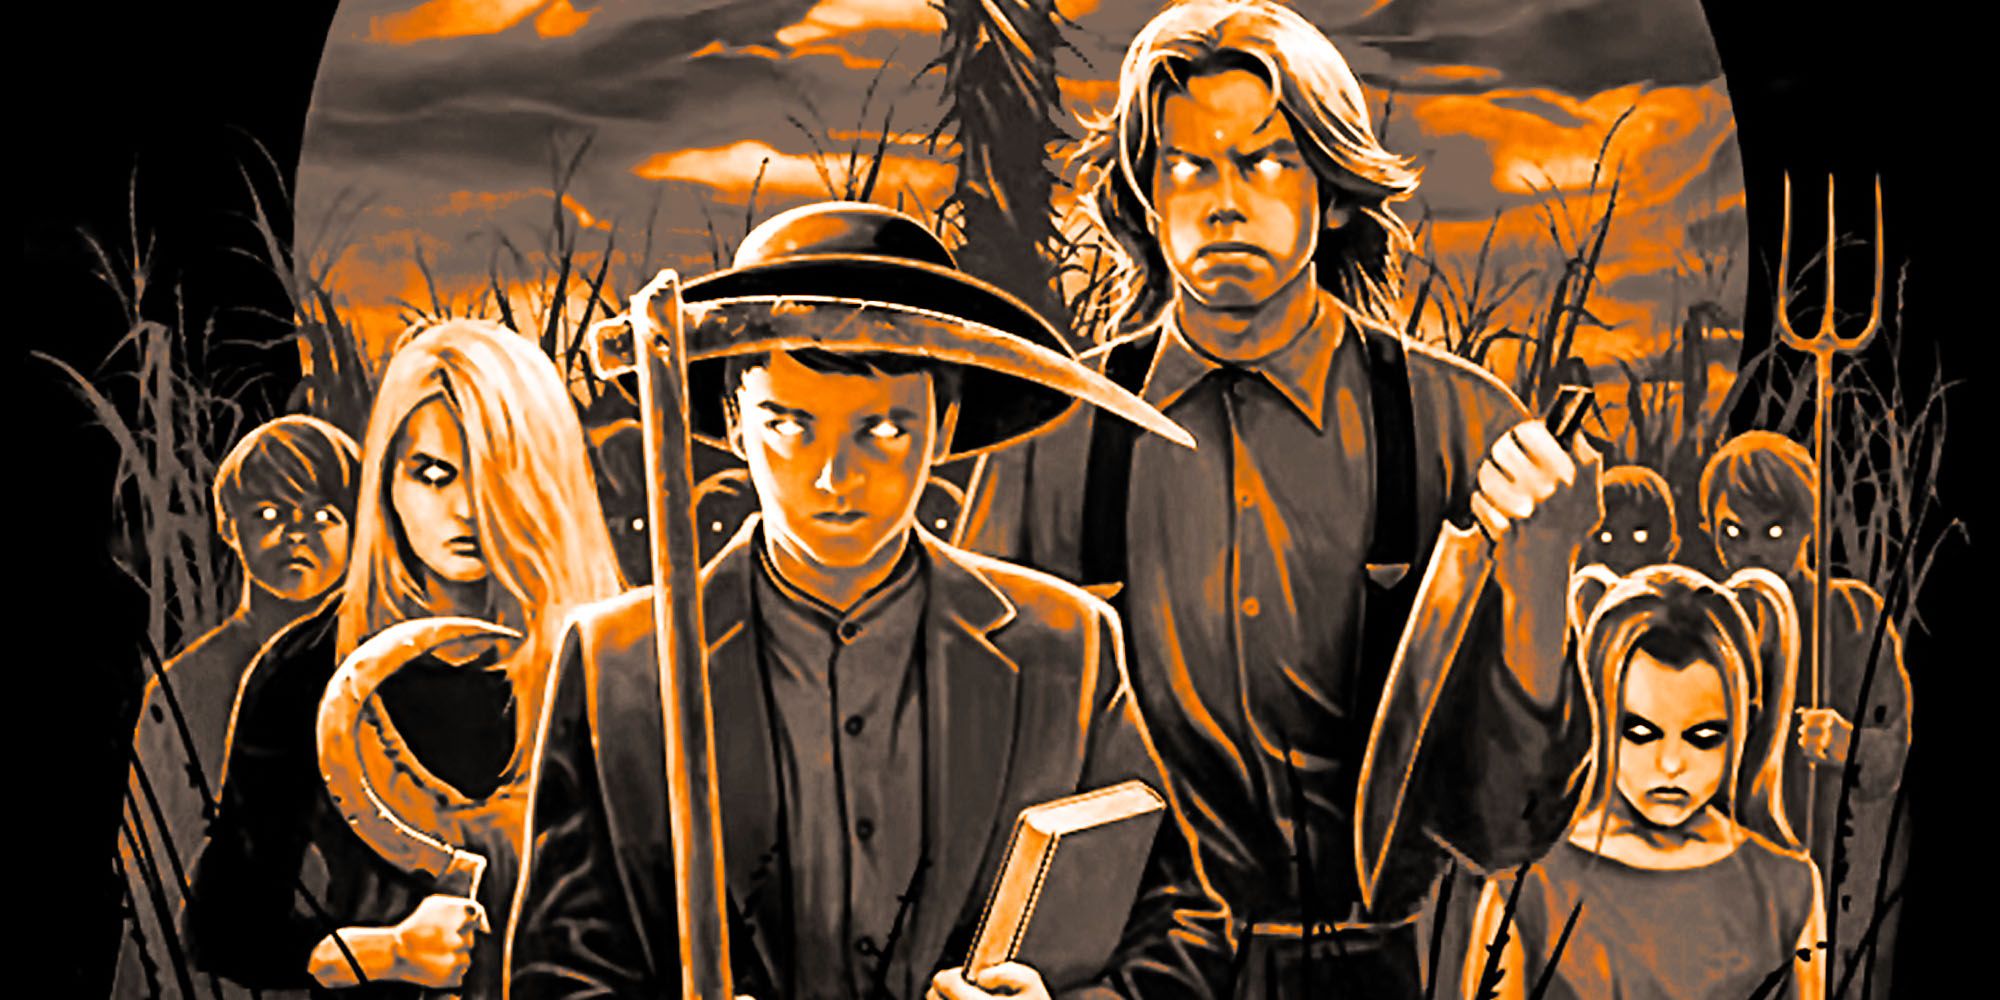 Stephen King Why Children of the Corn’s Movie Adaptation Failed